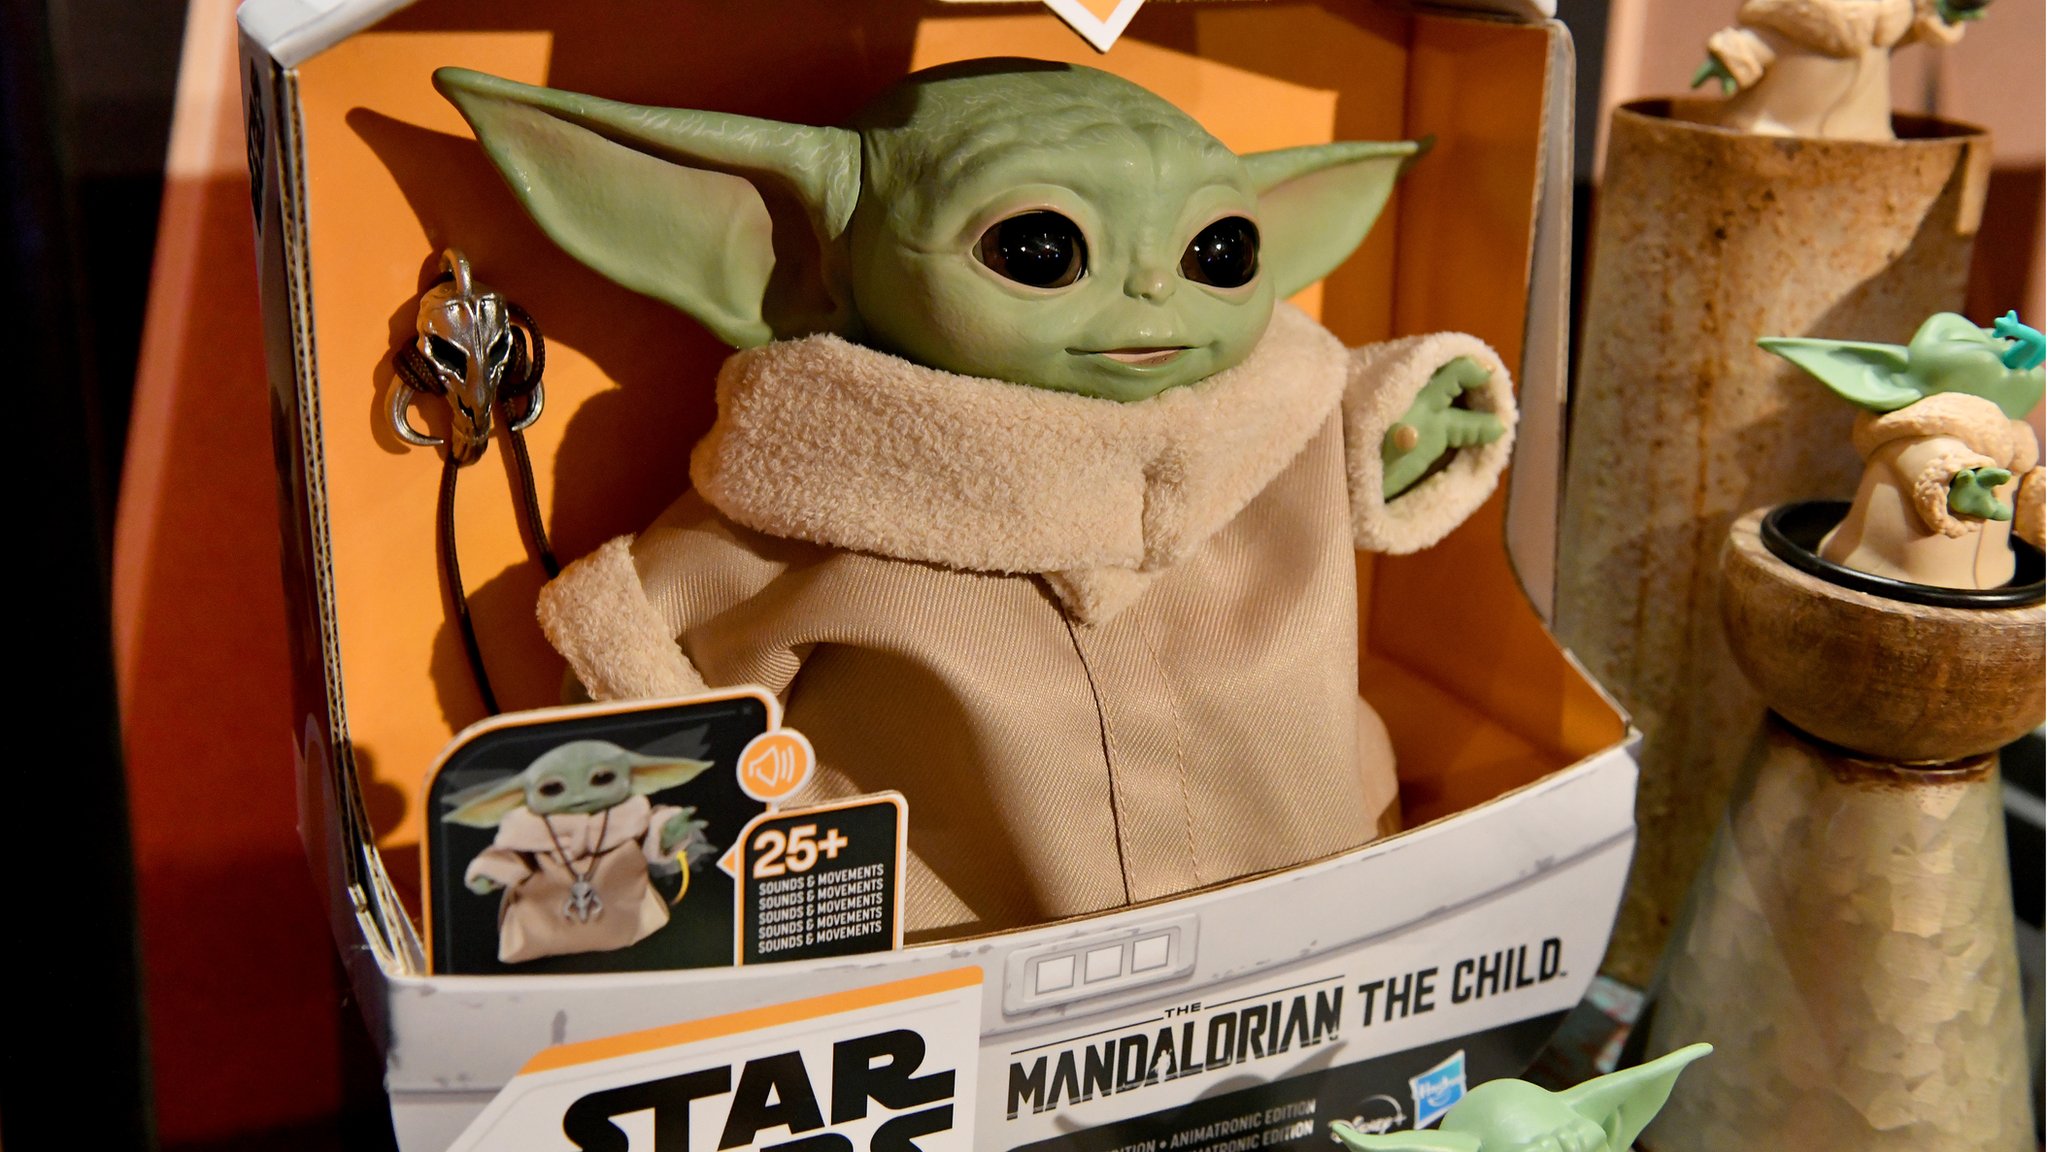 Disney Finally Unveils Baby Yoda Toys, Months After His TV Debut - Bloomberg